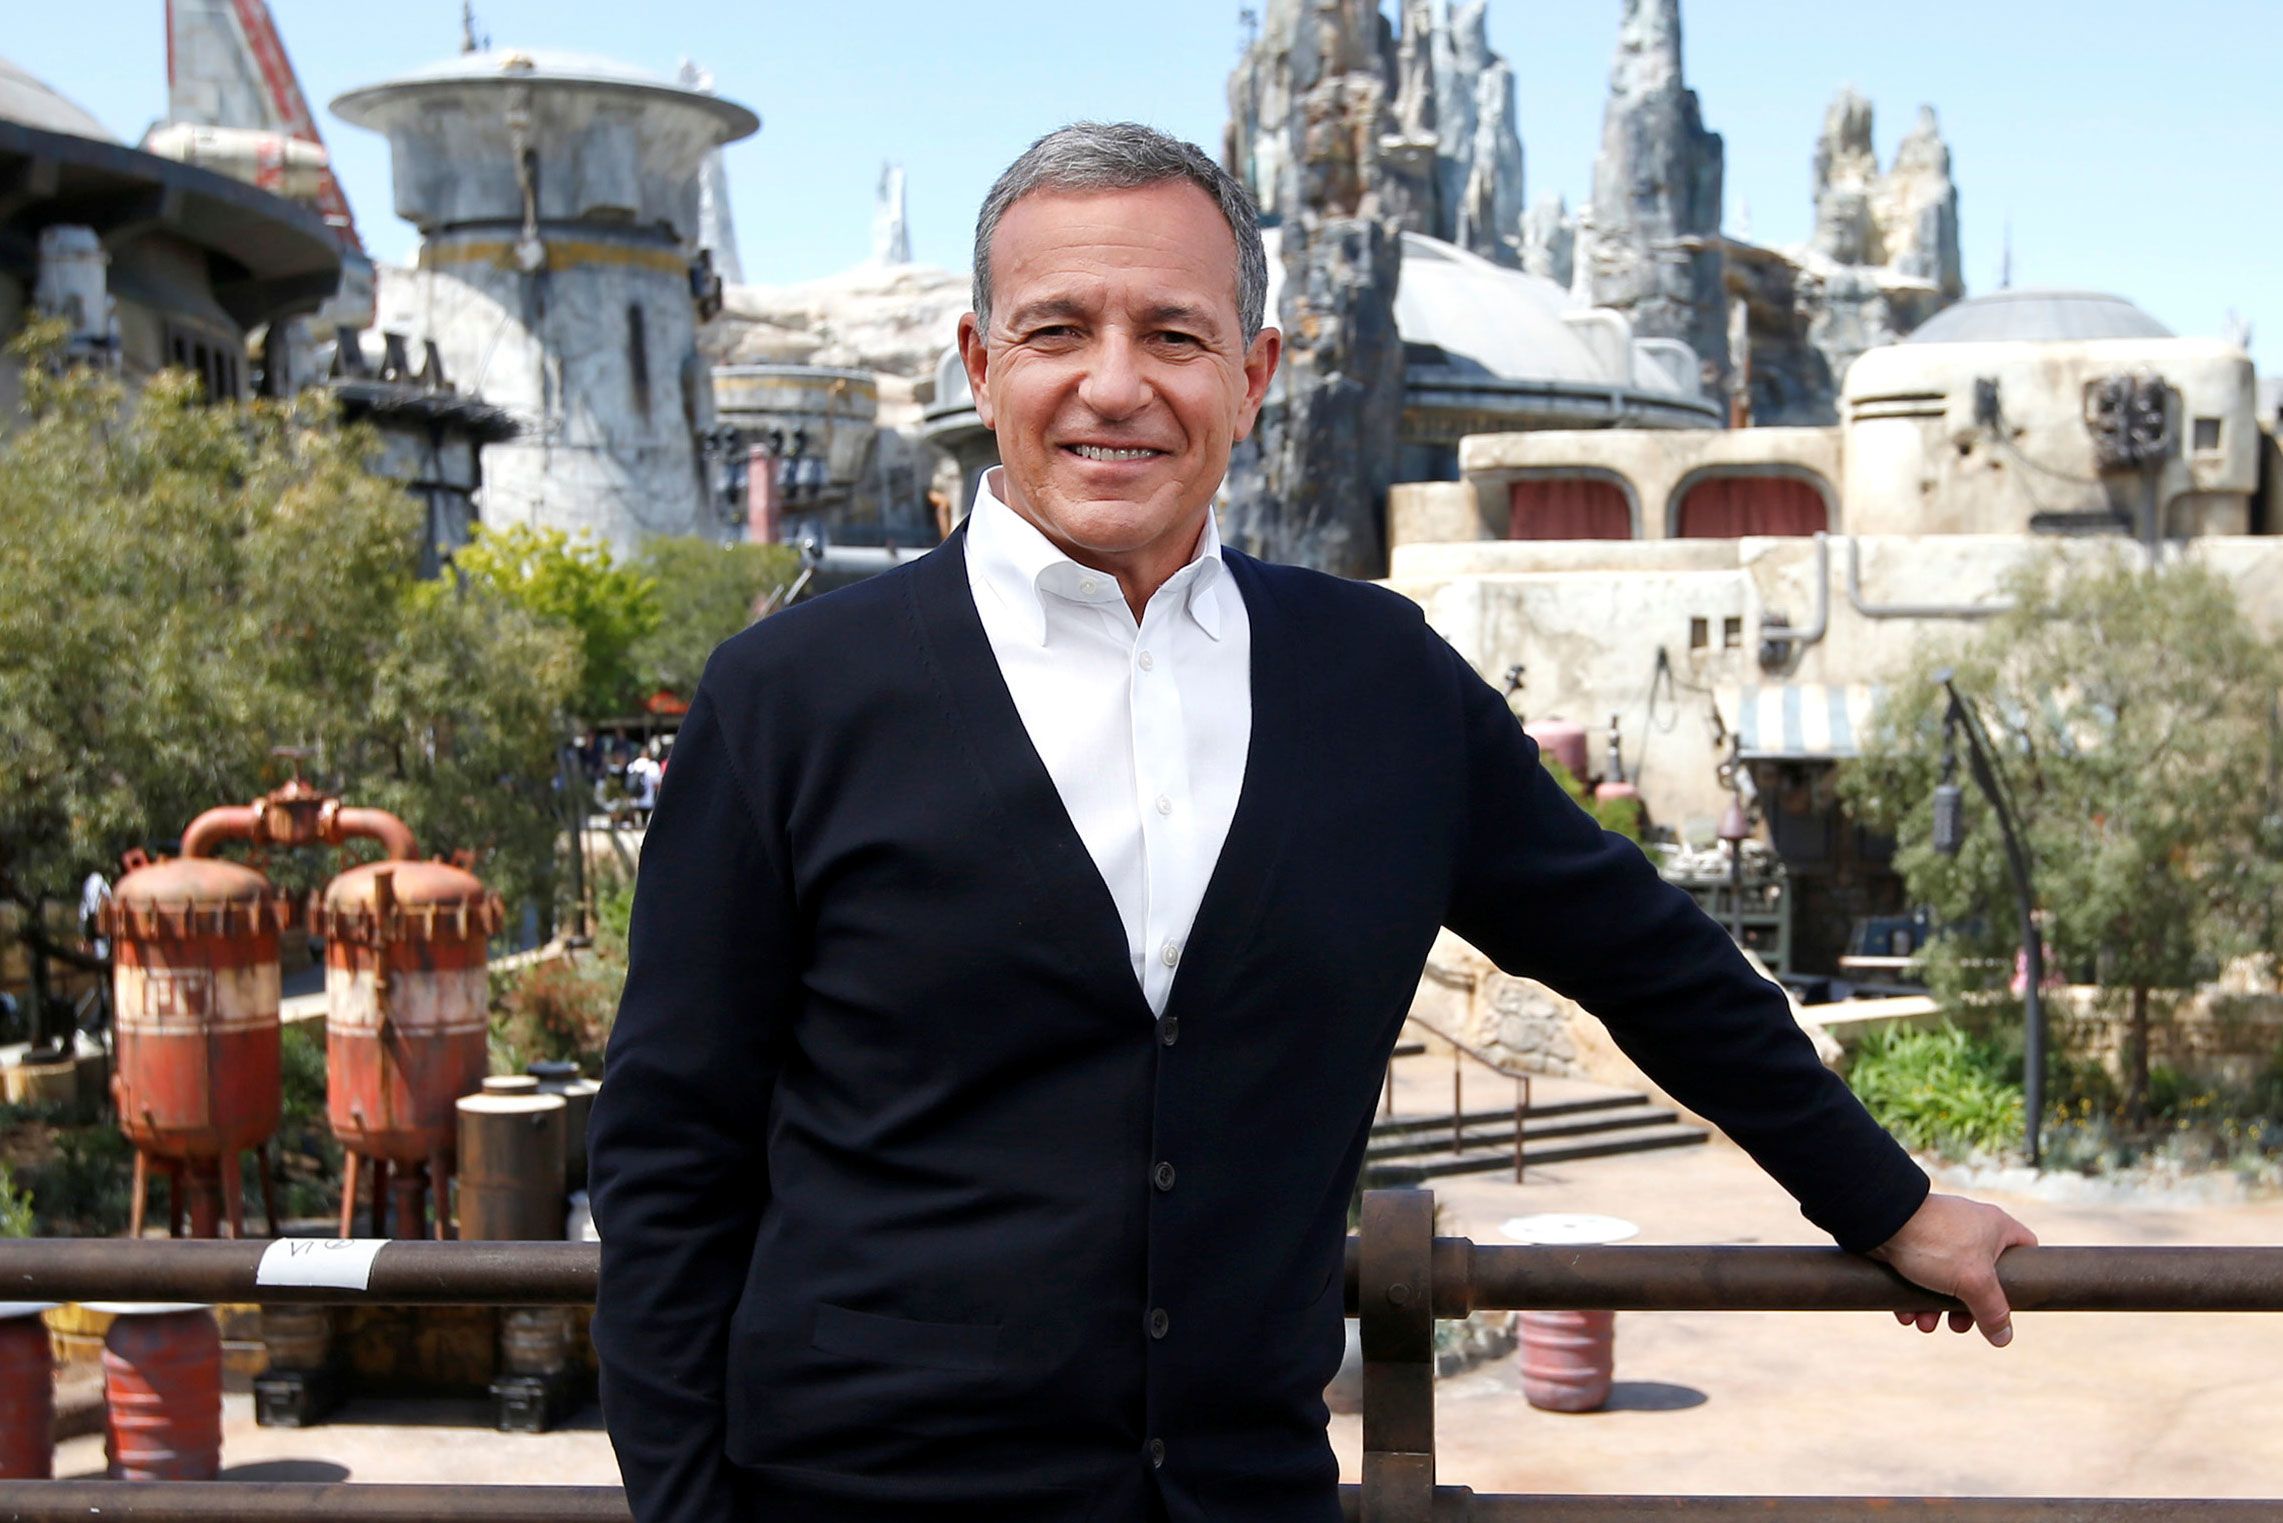 Disney CEO Bob Iger interview after Q3 earnings